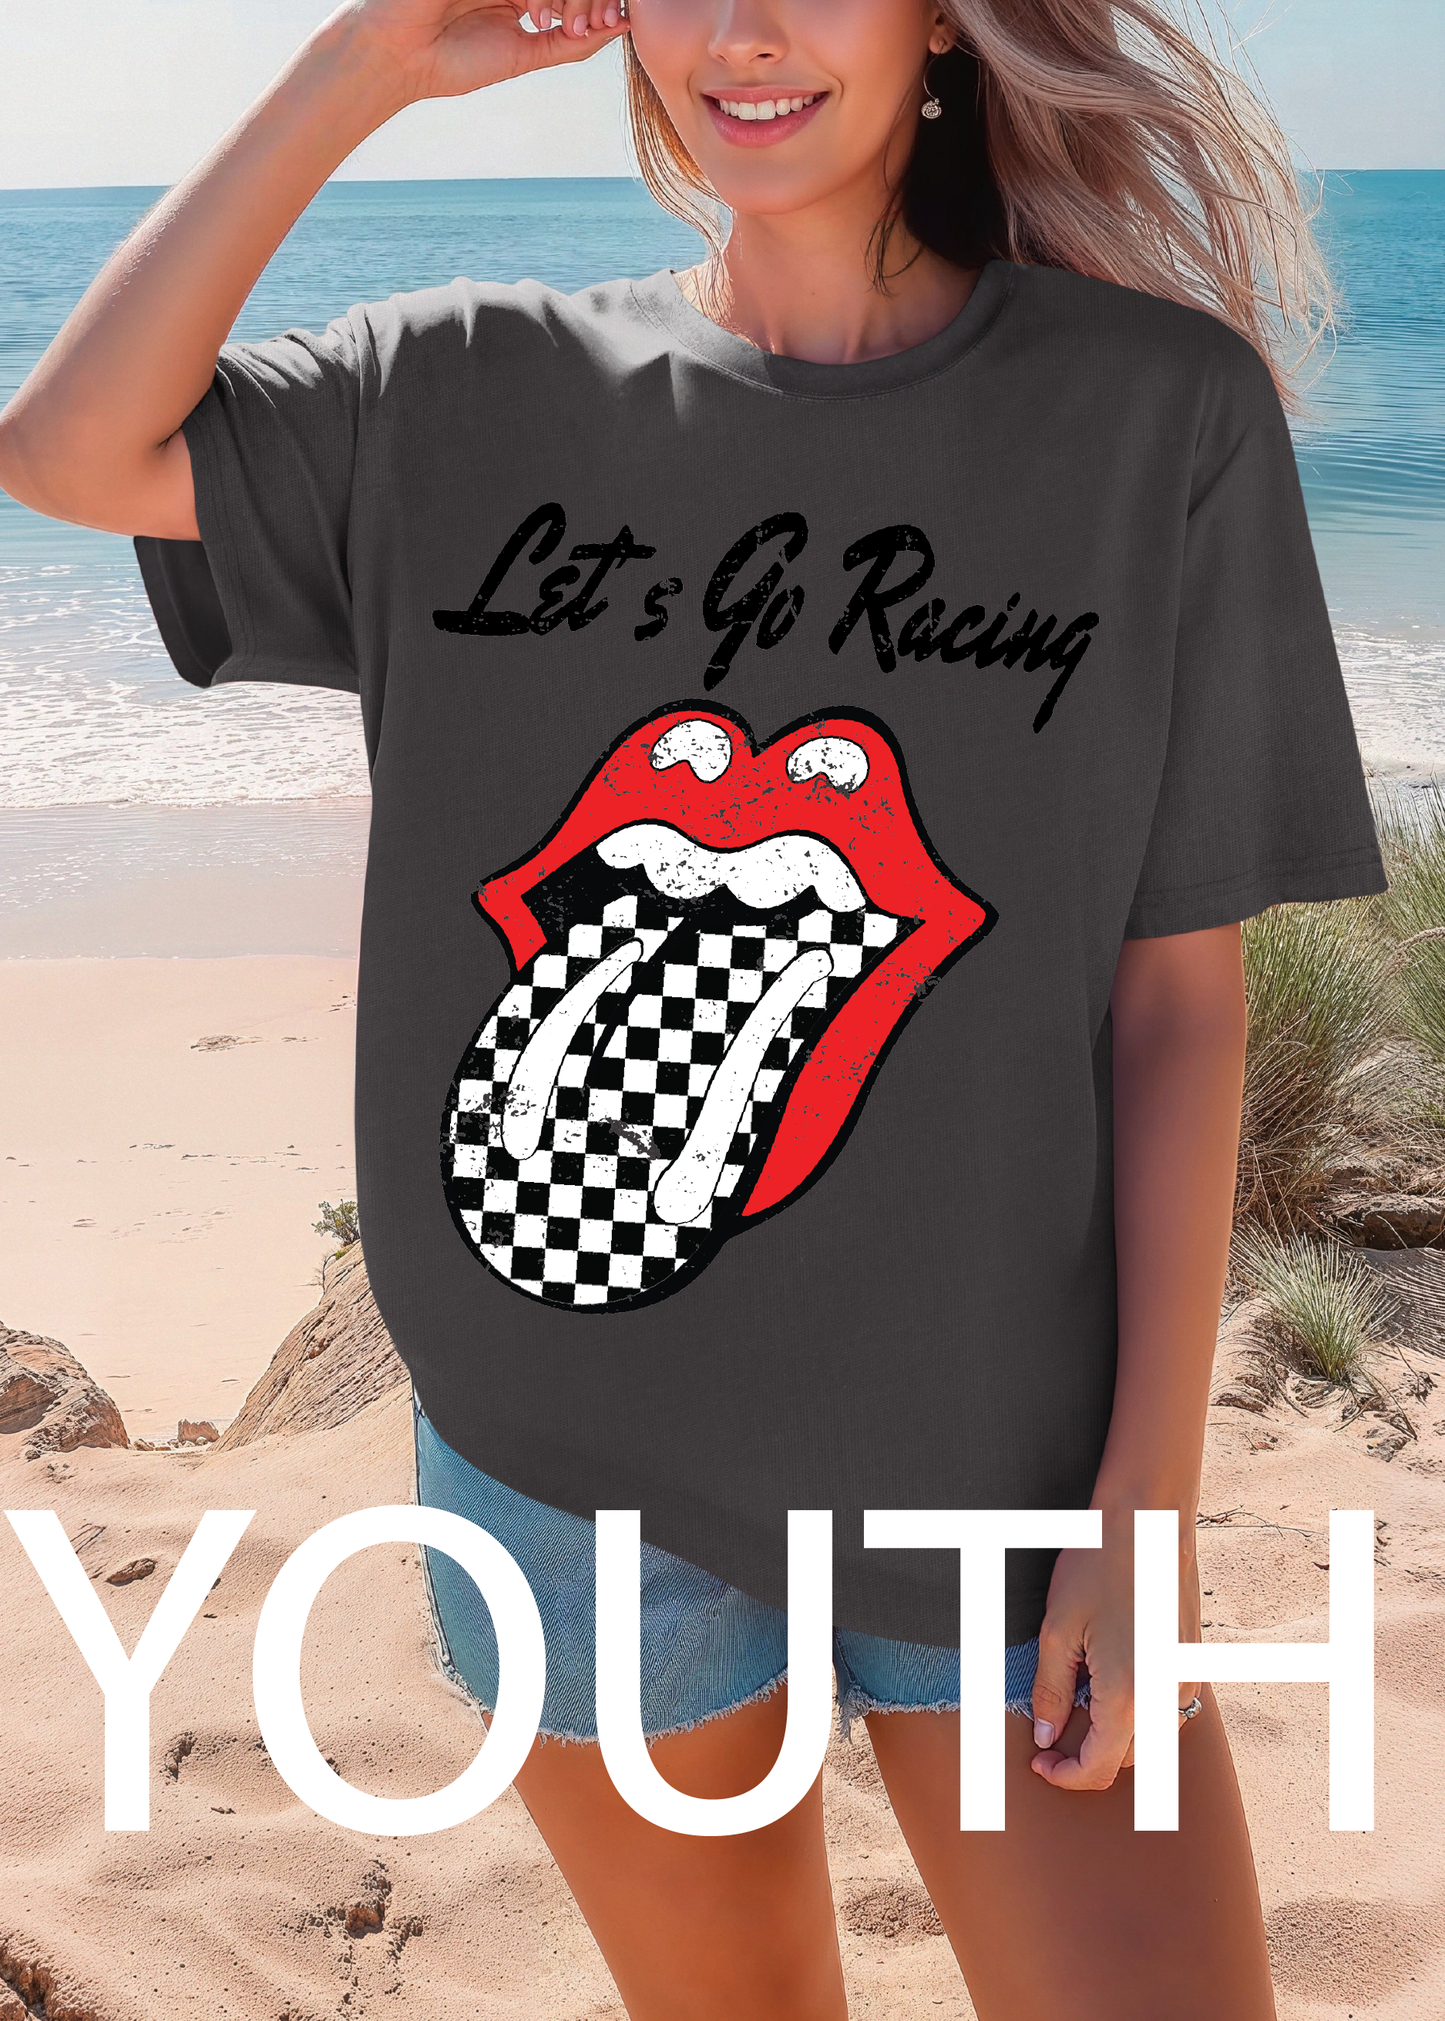 YOUTH Let's Go Racing Tee